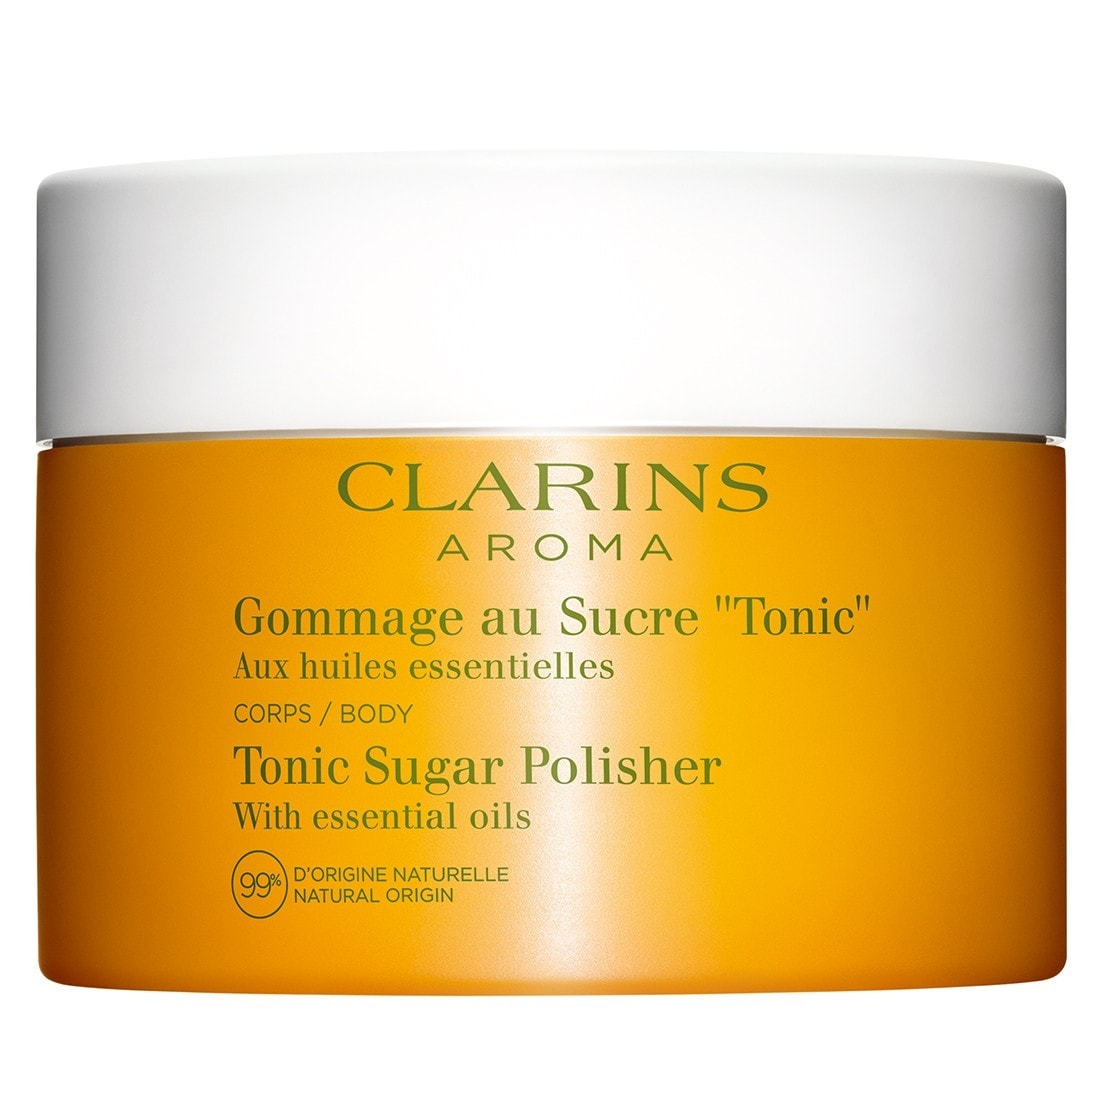 Clarins Aromaphytocare Gommage au Sucre "Tonic"